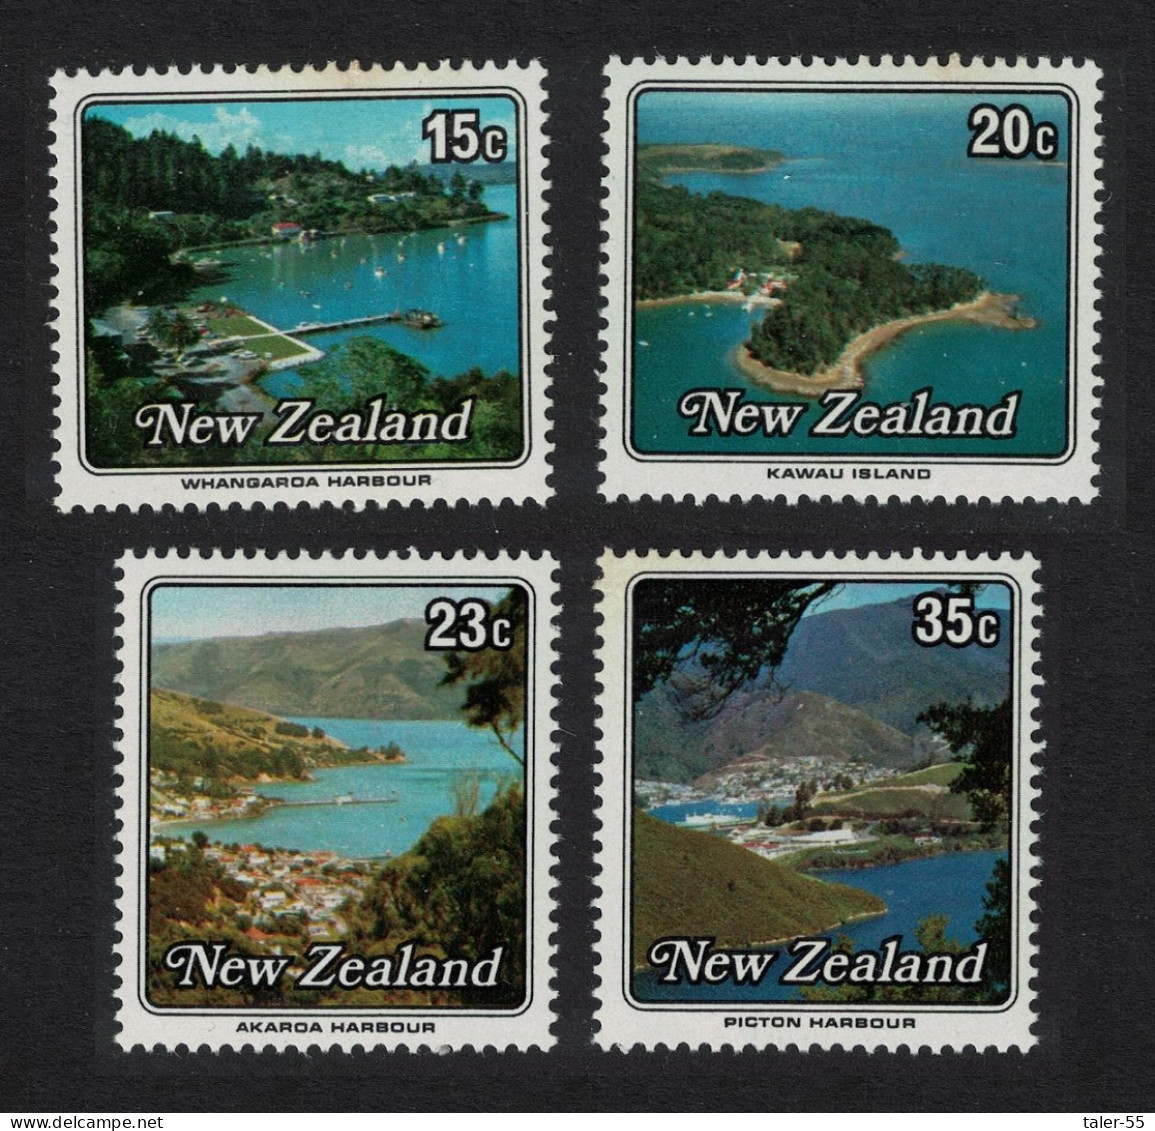 New Zealand Small Harbours 4v 1979 MNH SG#1192-1195 - Neufs